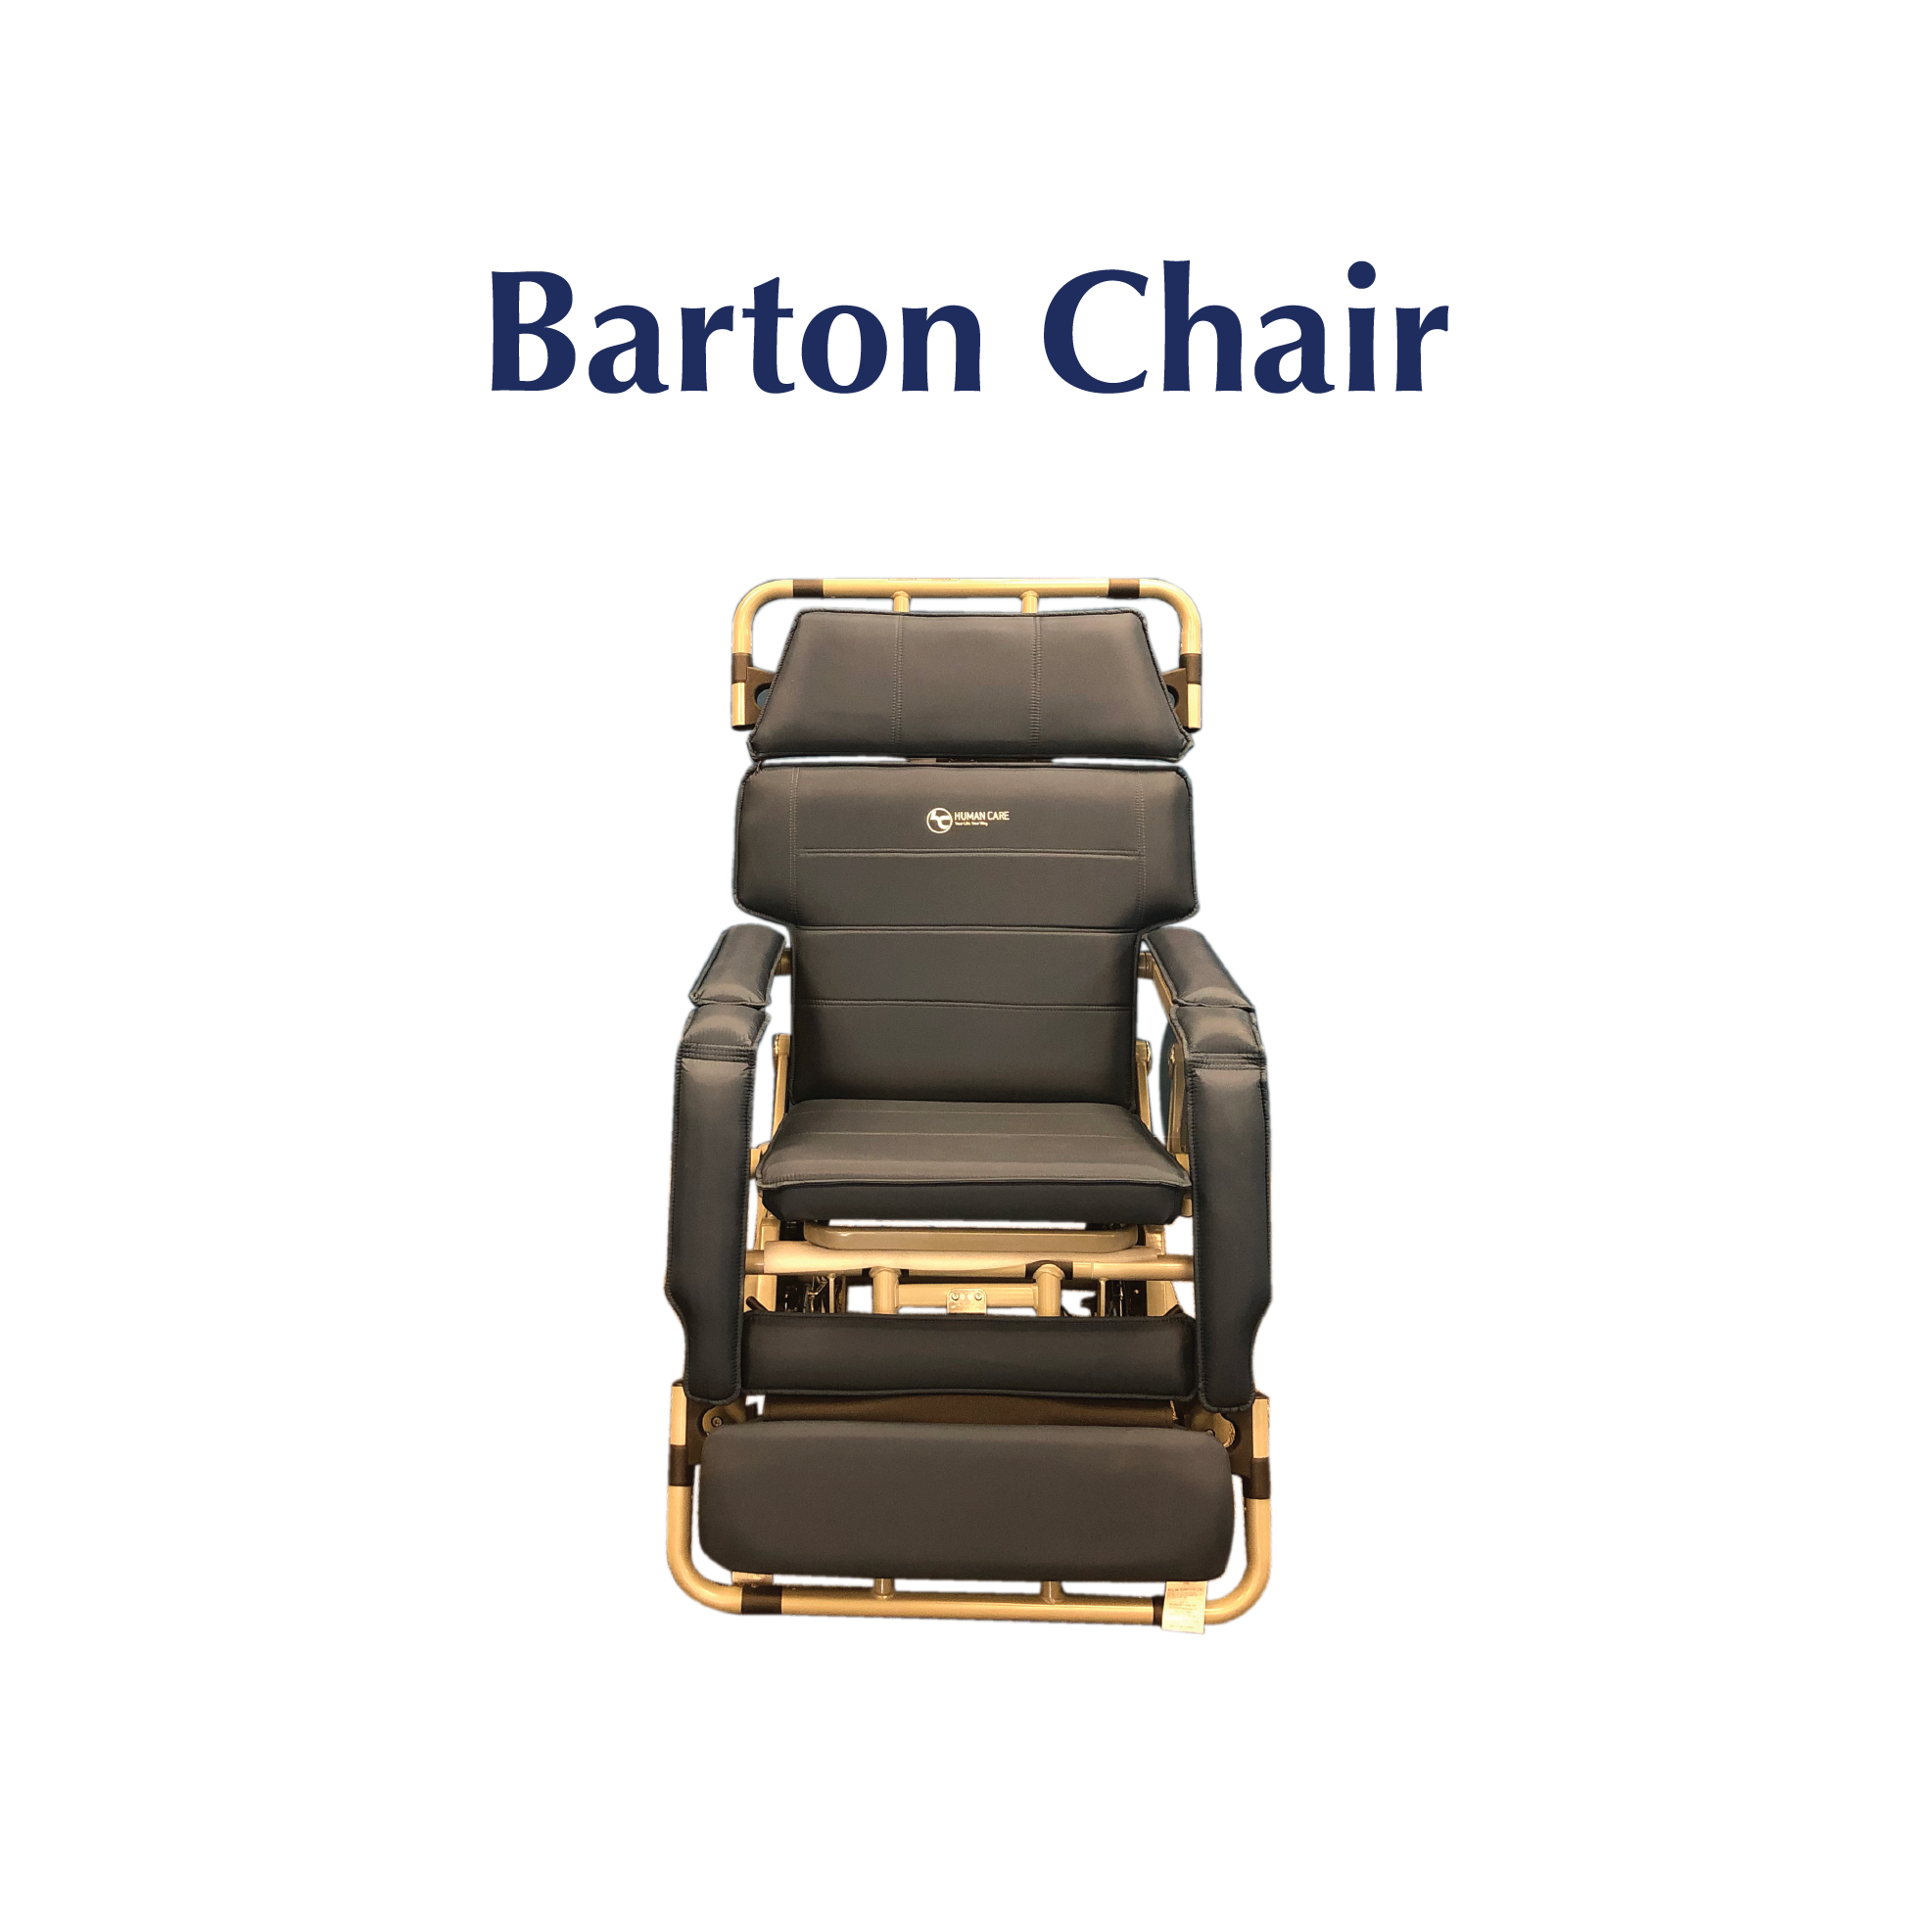 Human Care Convertible Patient Transfer Chair